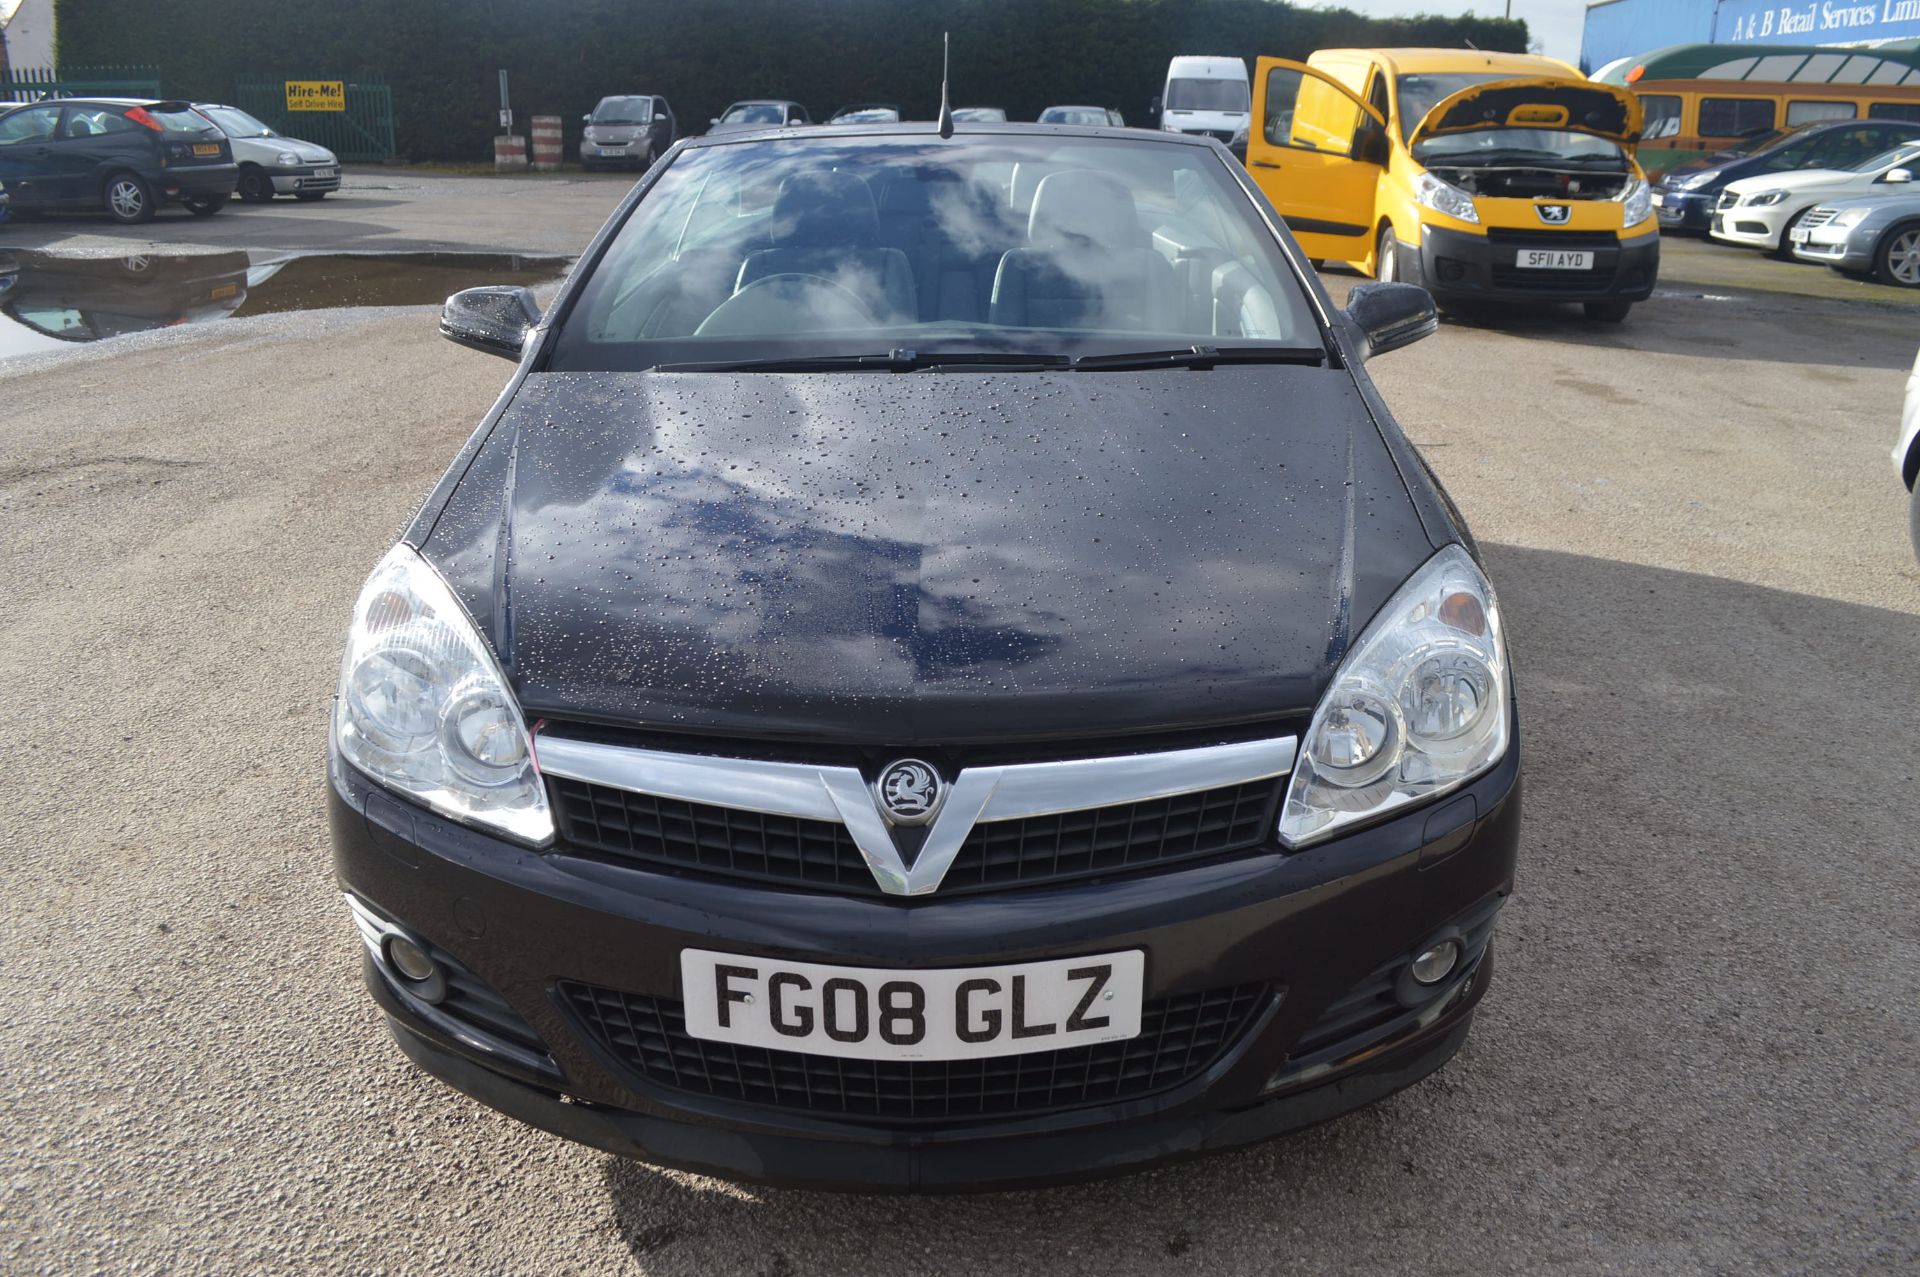 K - 2008/08 REG VAUXHALL ASTRA T-TOP DESIGN CDTI - ROOF CAN BE PUT DOWN/UP WITH THE KEY   DATE OF - Image 2 of 22